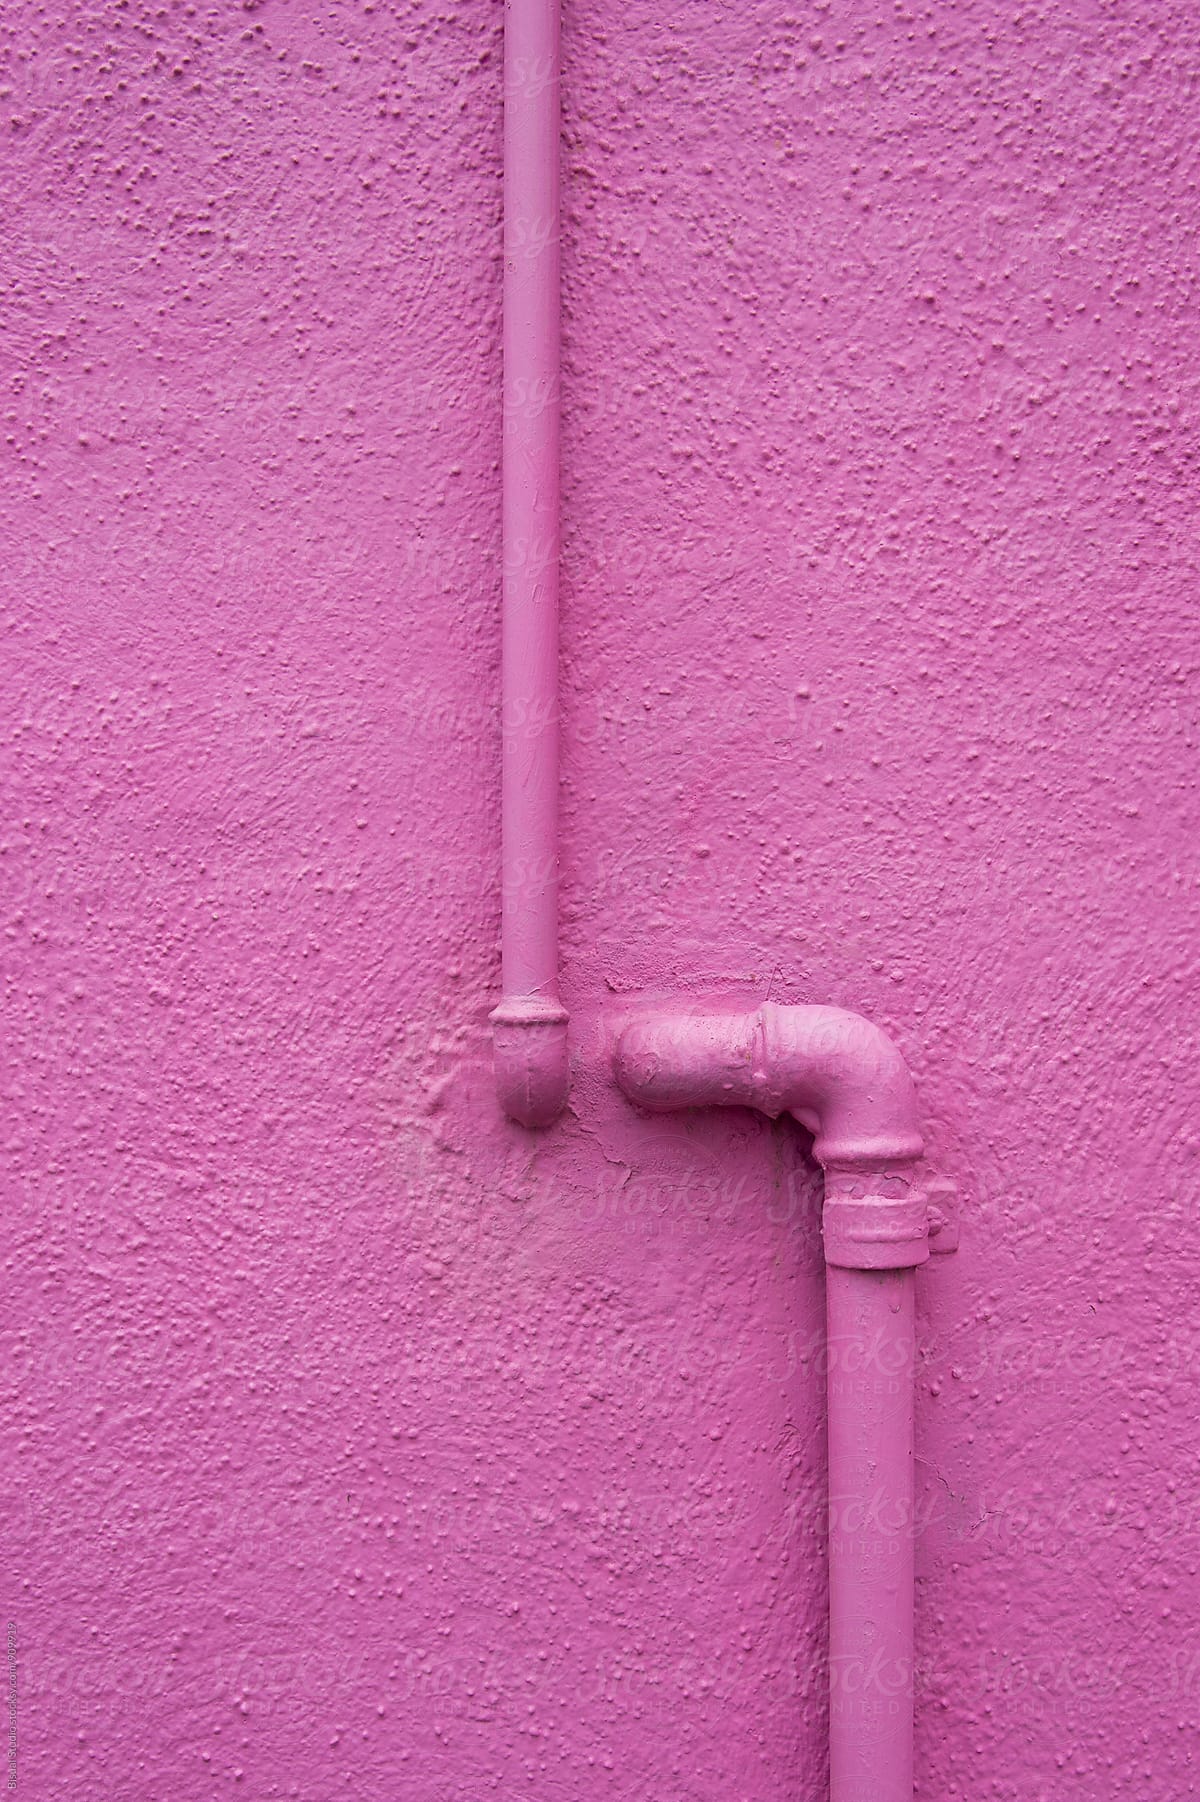 Pink pipe on Pink wall in Burano, Italy